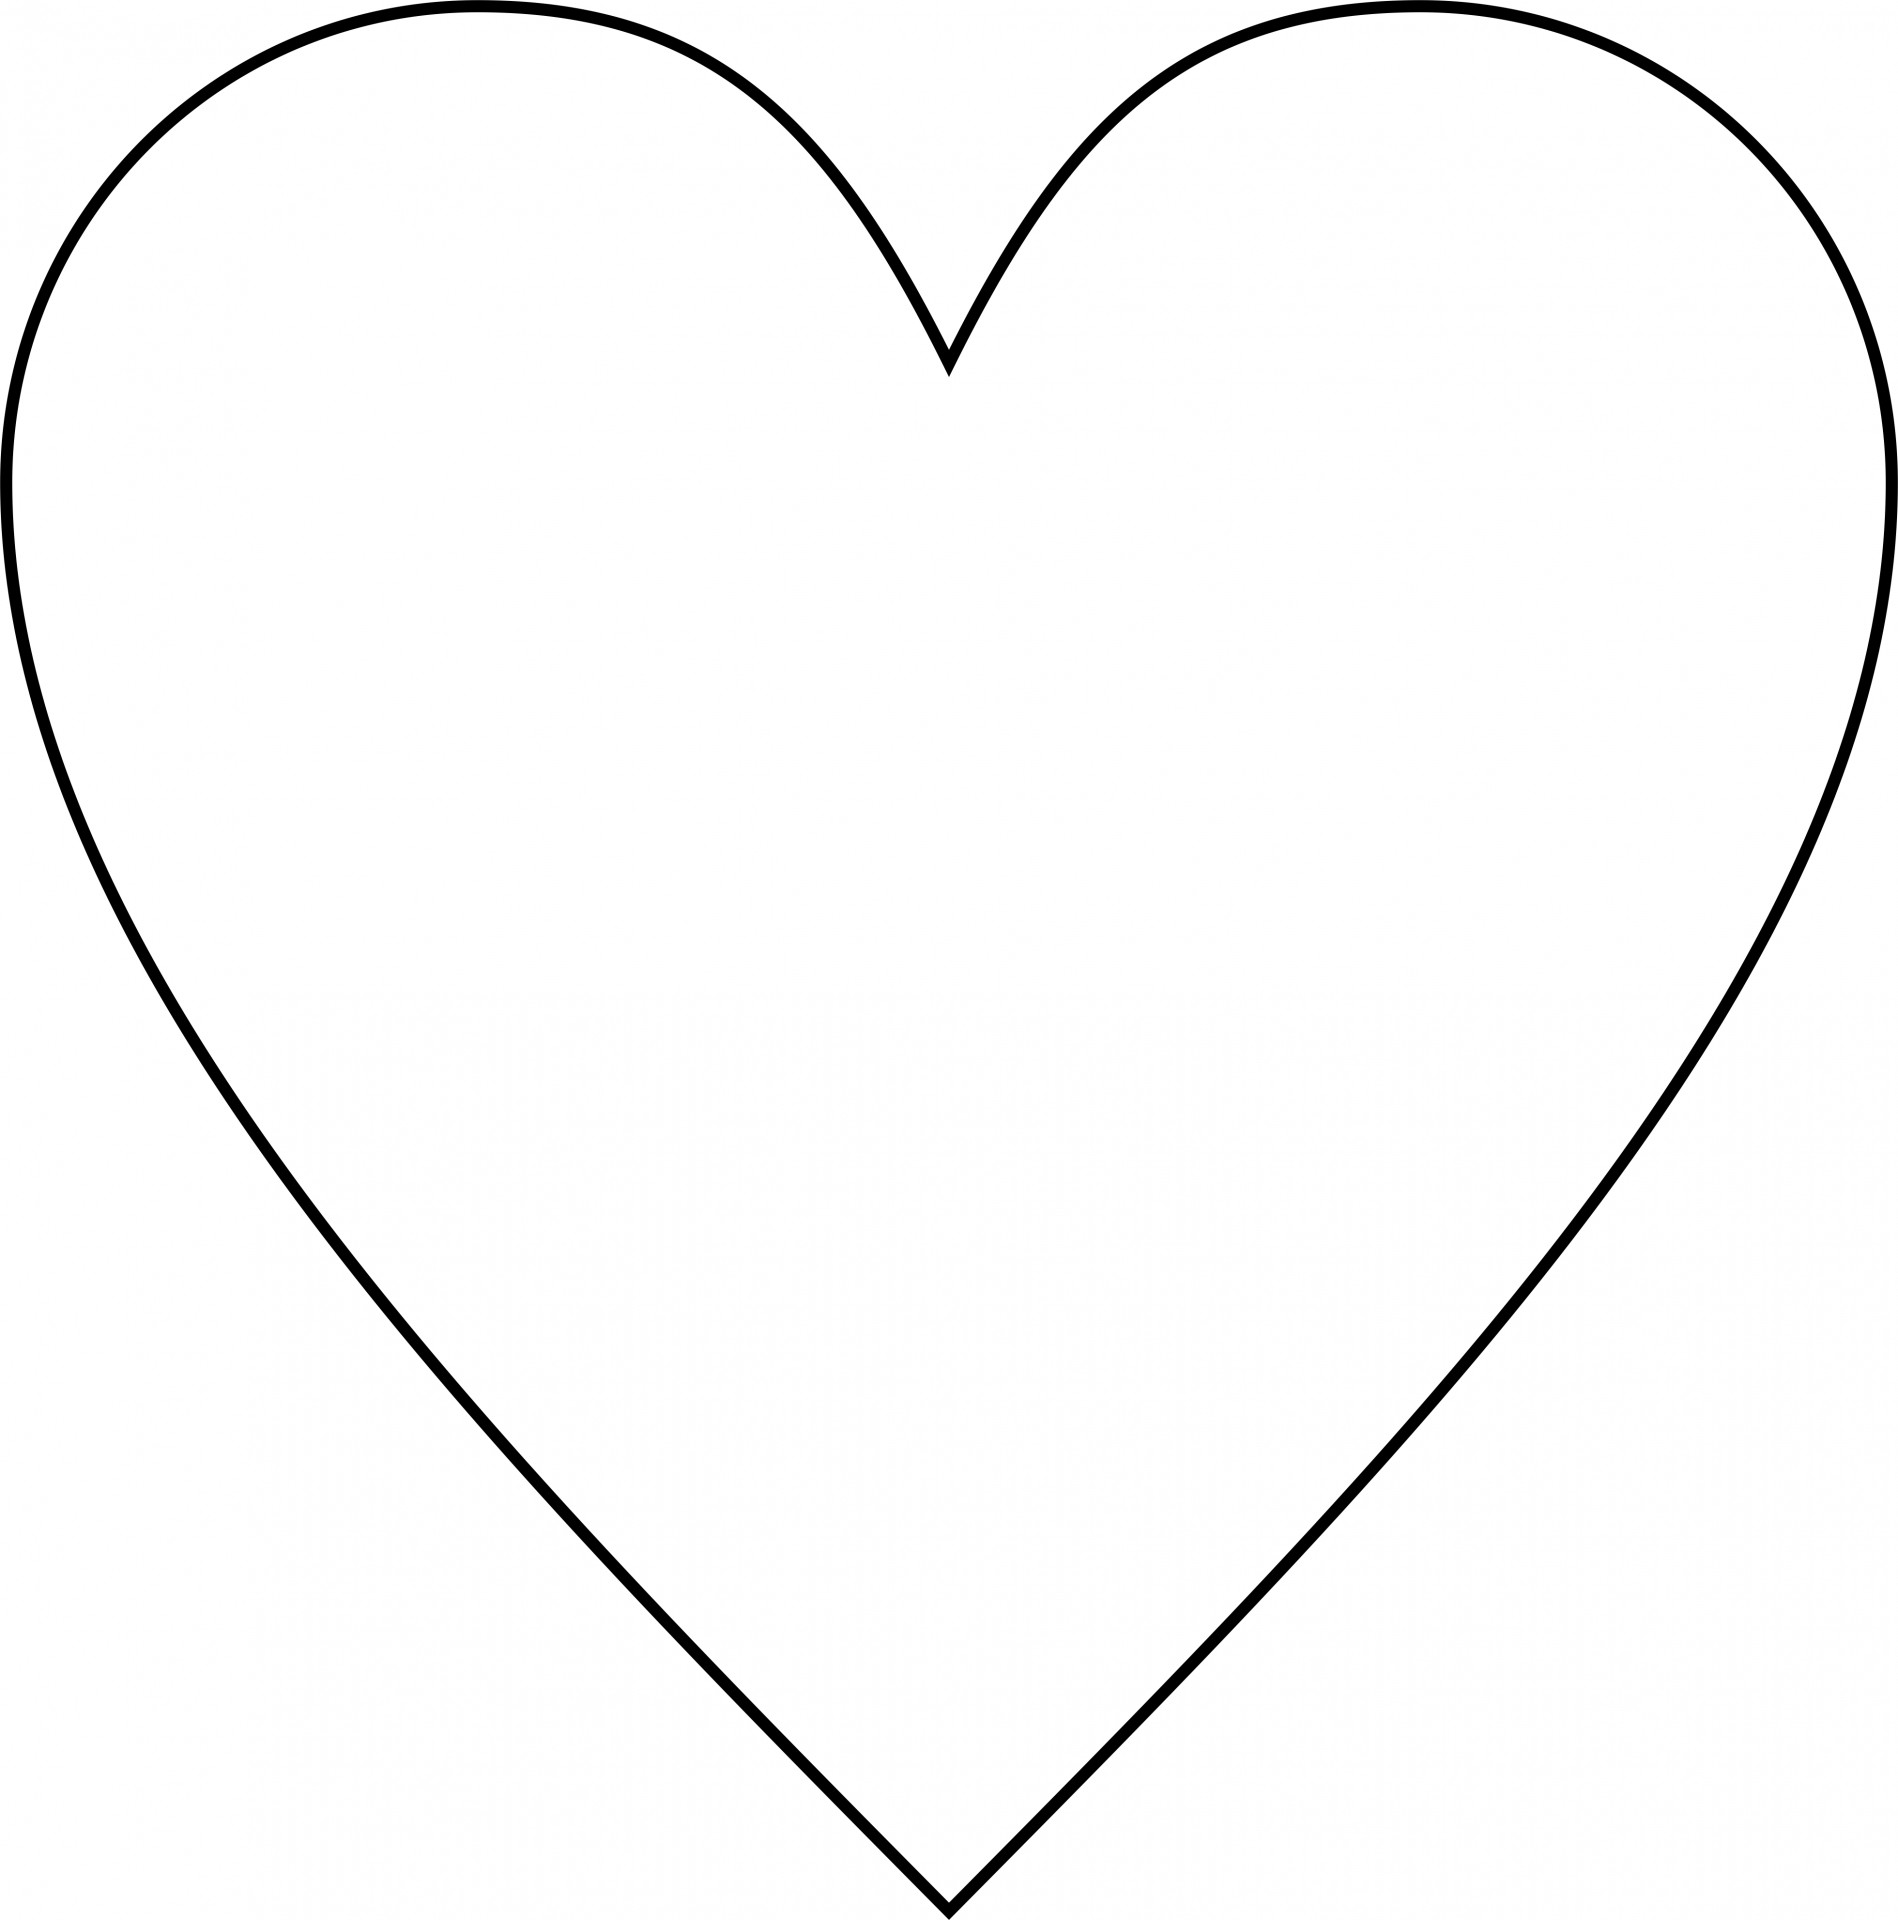 empty heart outline free photo